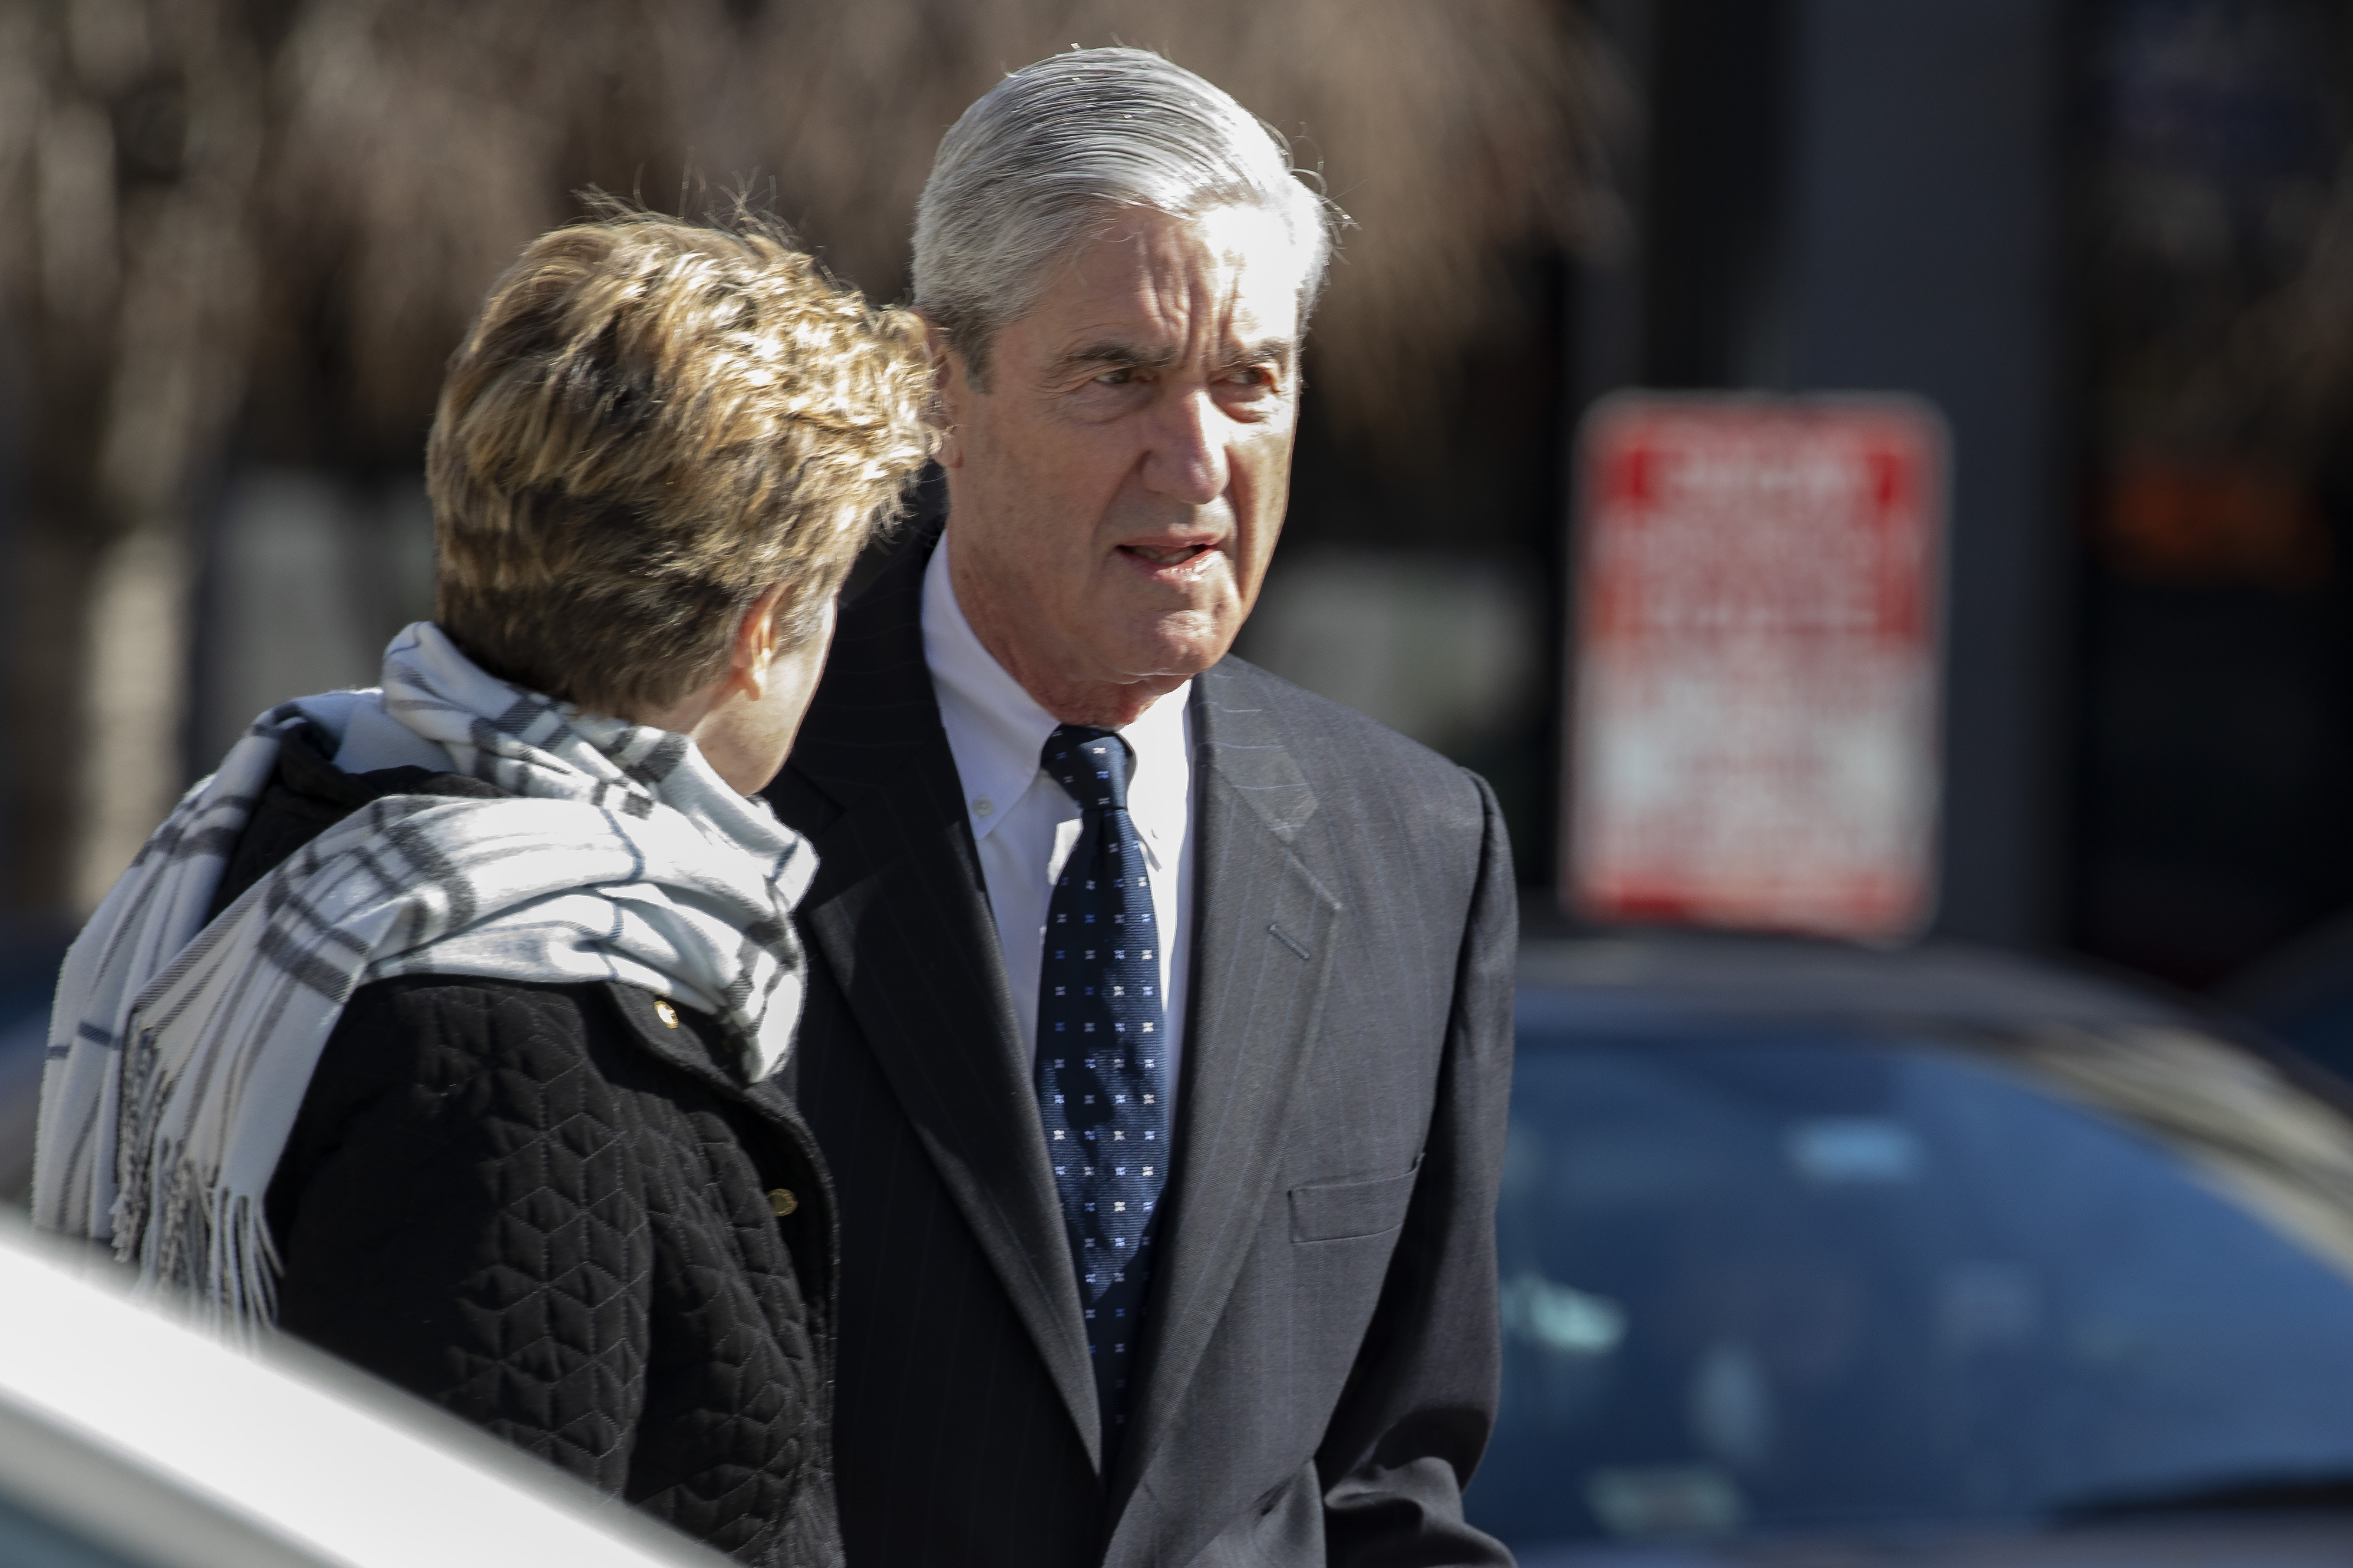 Special Counsel Robert Mueller in Washington, D.C. on March 24, 2019. (Tasos Katopodis/Getty Images)